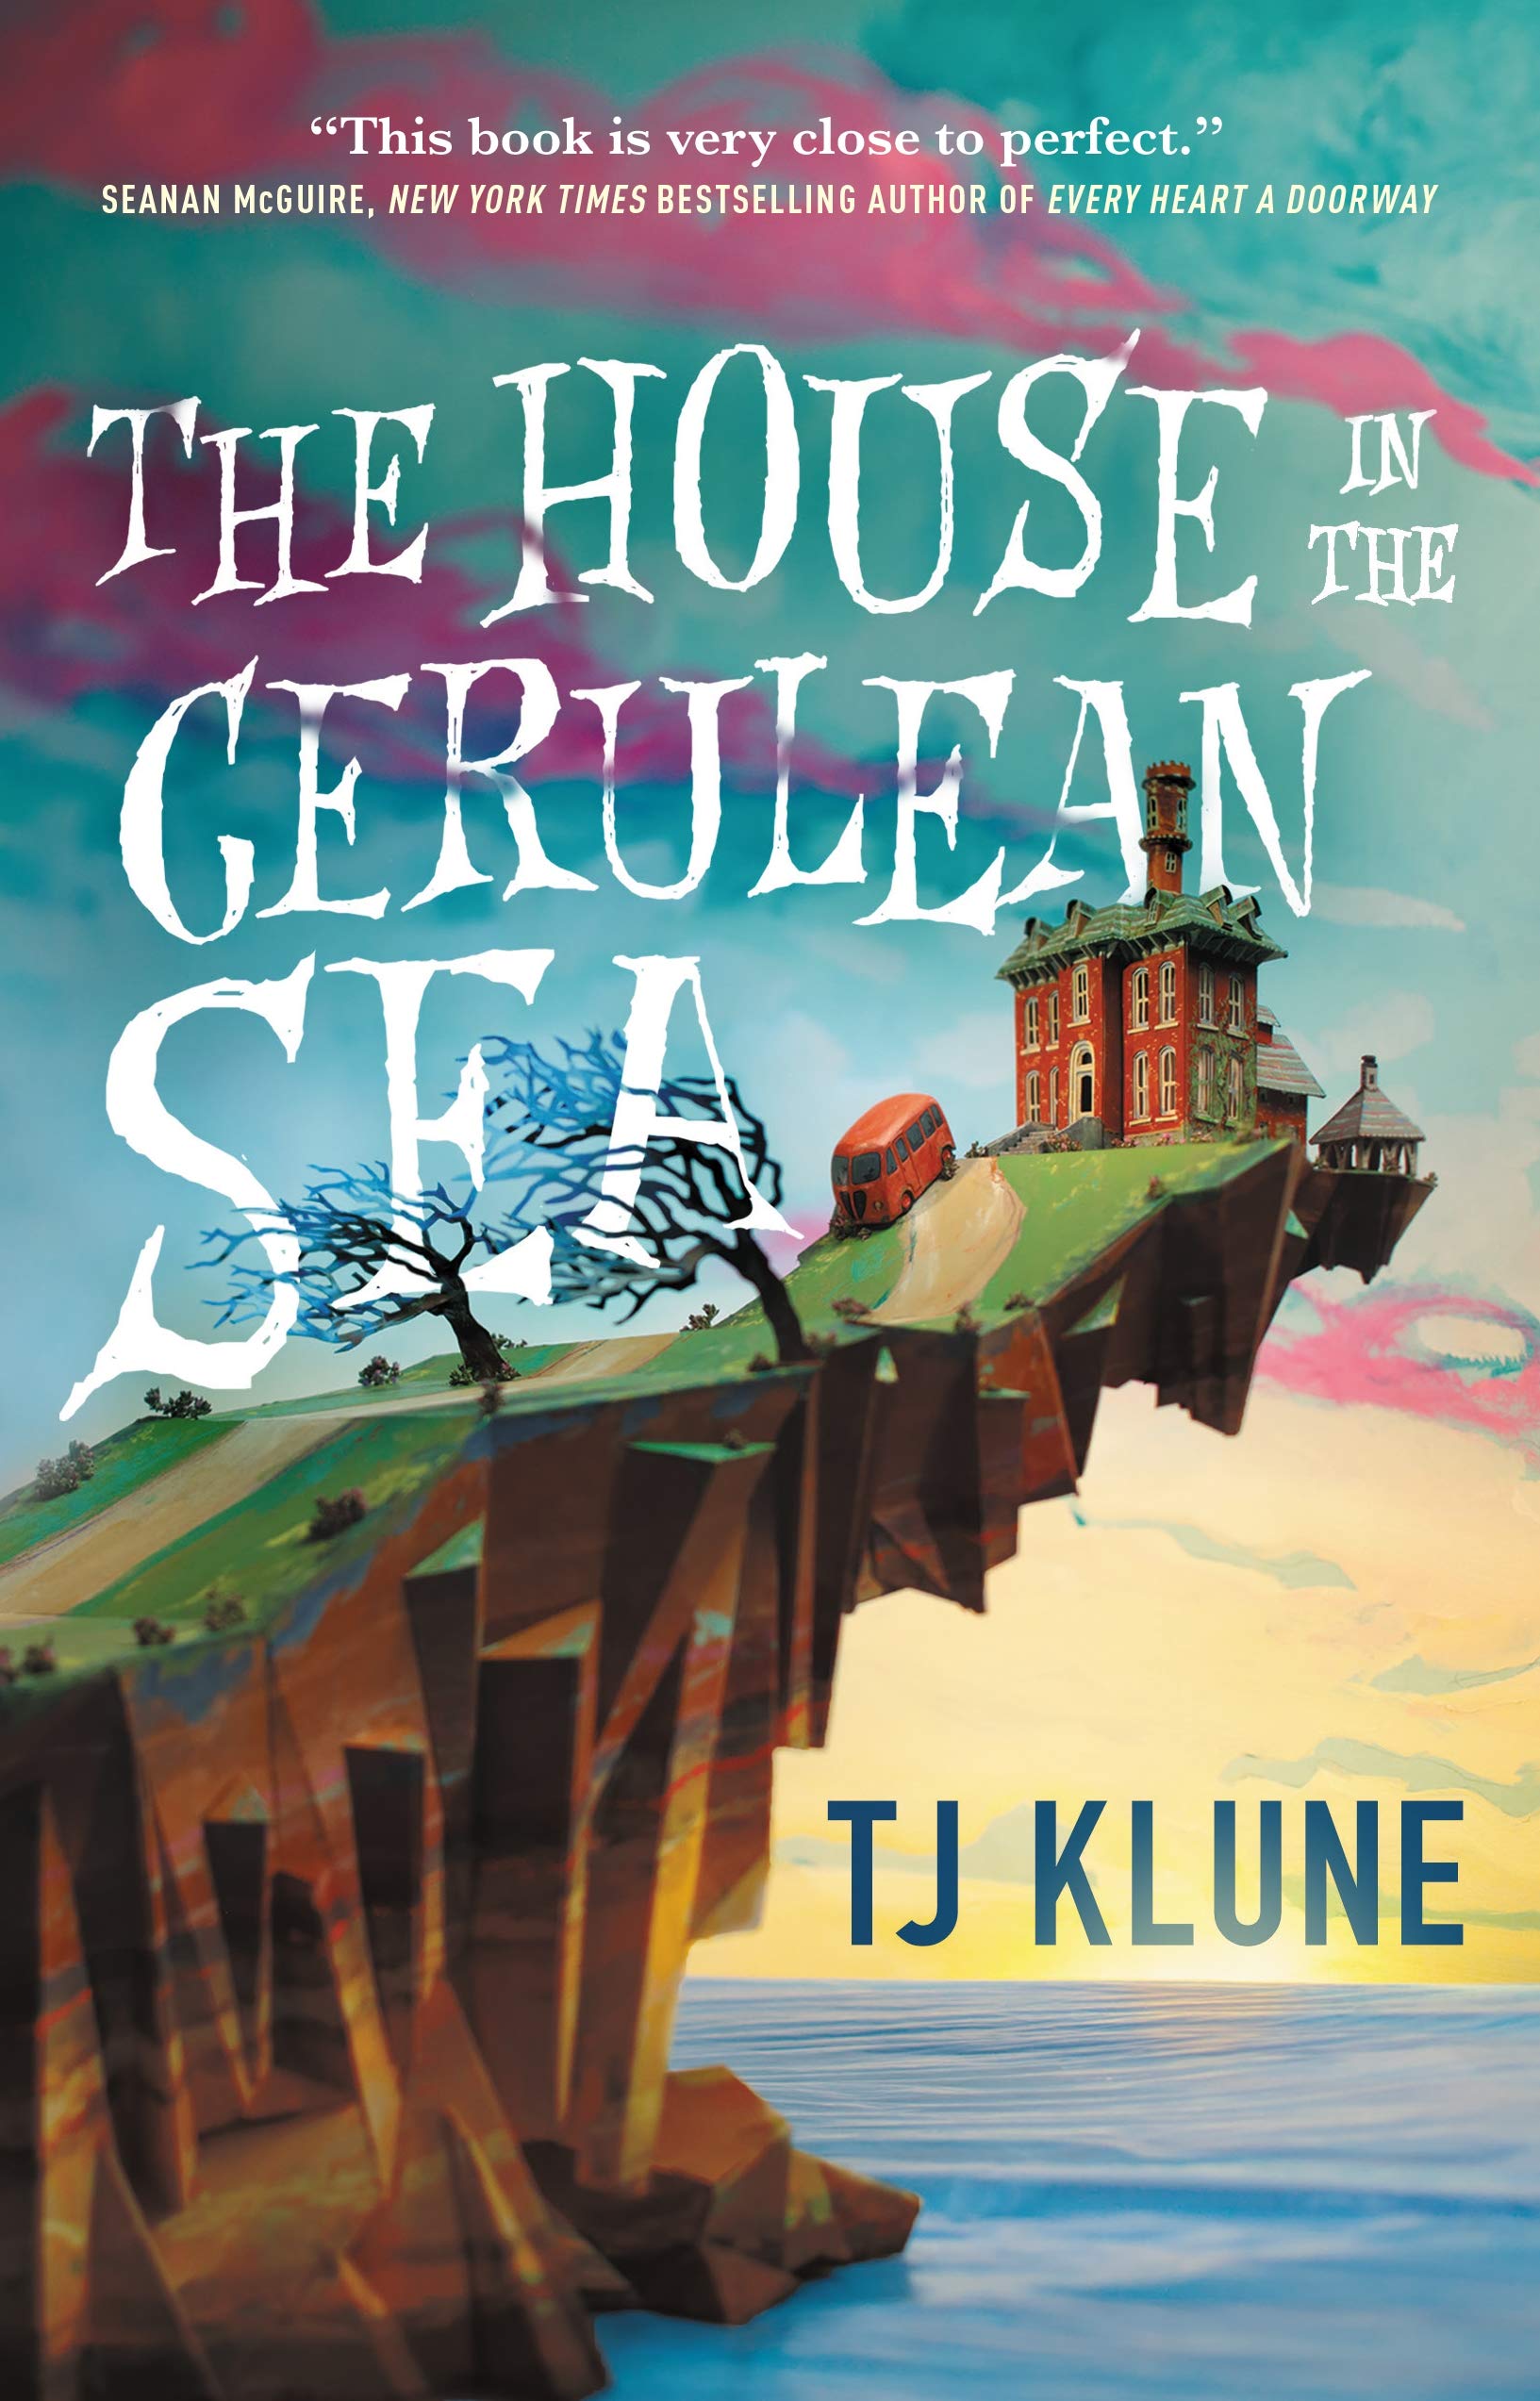 Cover of "House in the Cerulean Sea"